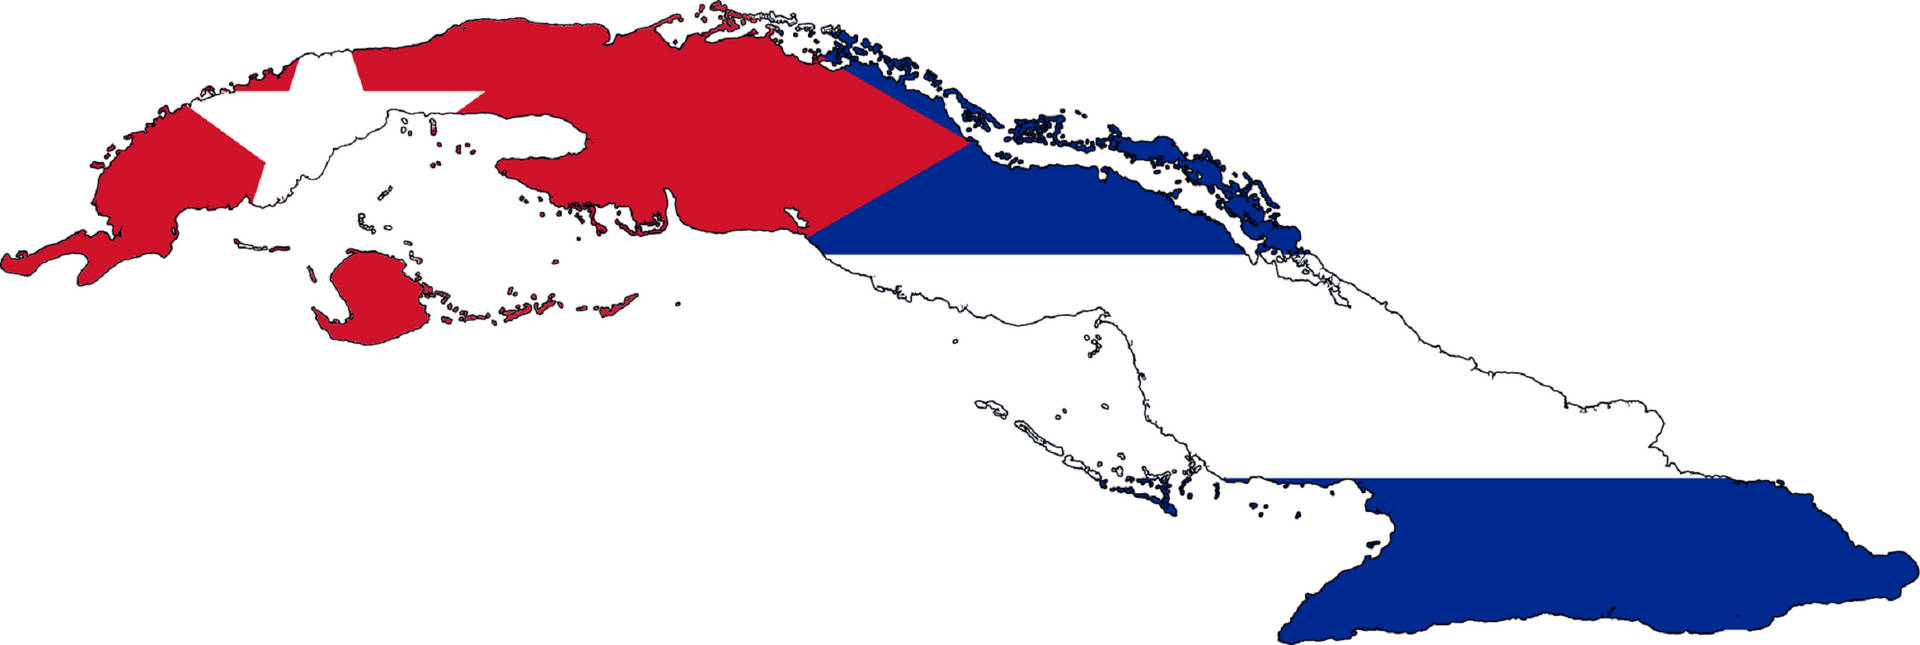 The Vibrant Cuban Flag Displayed Over Cuba's Geographic Map Background